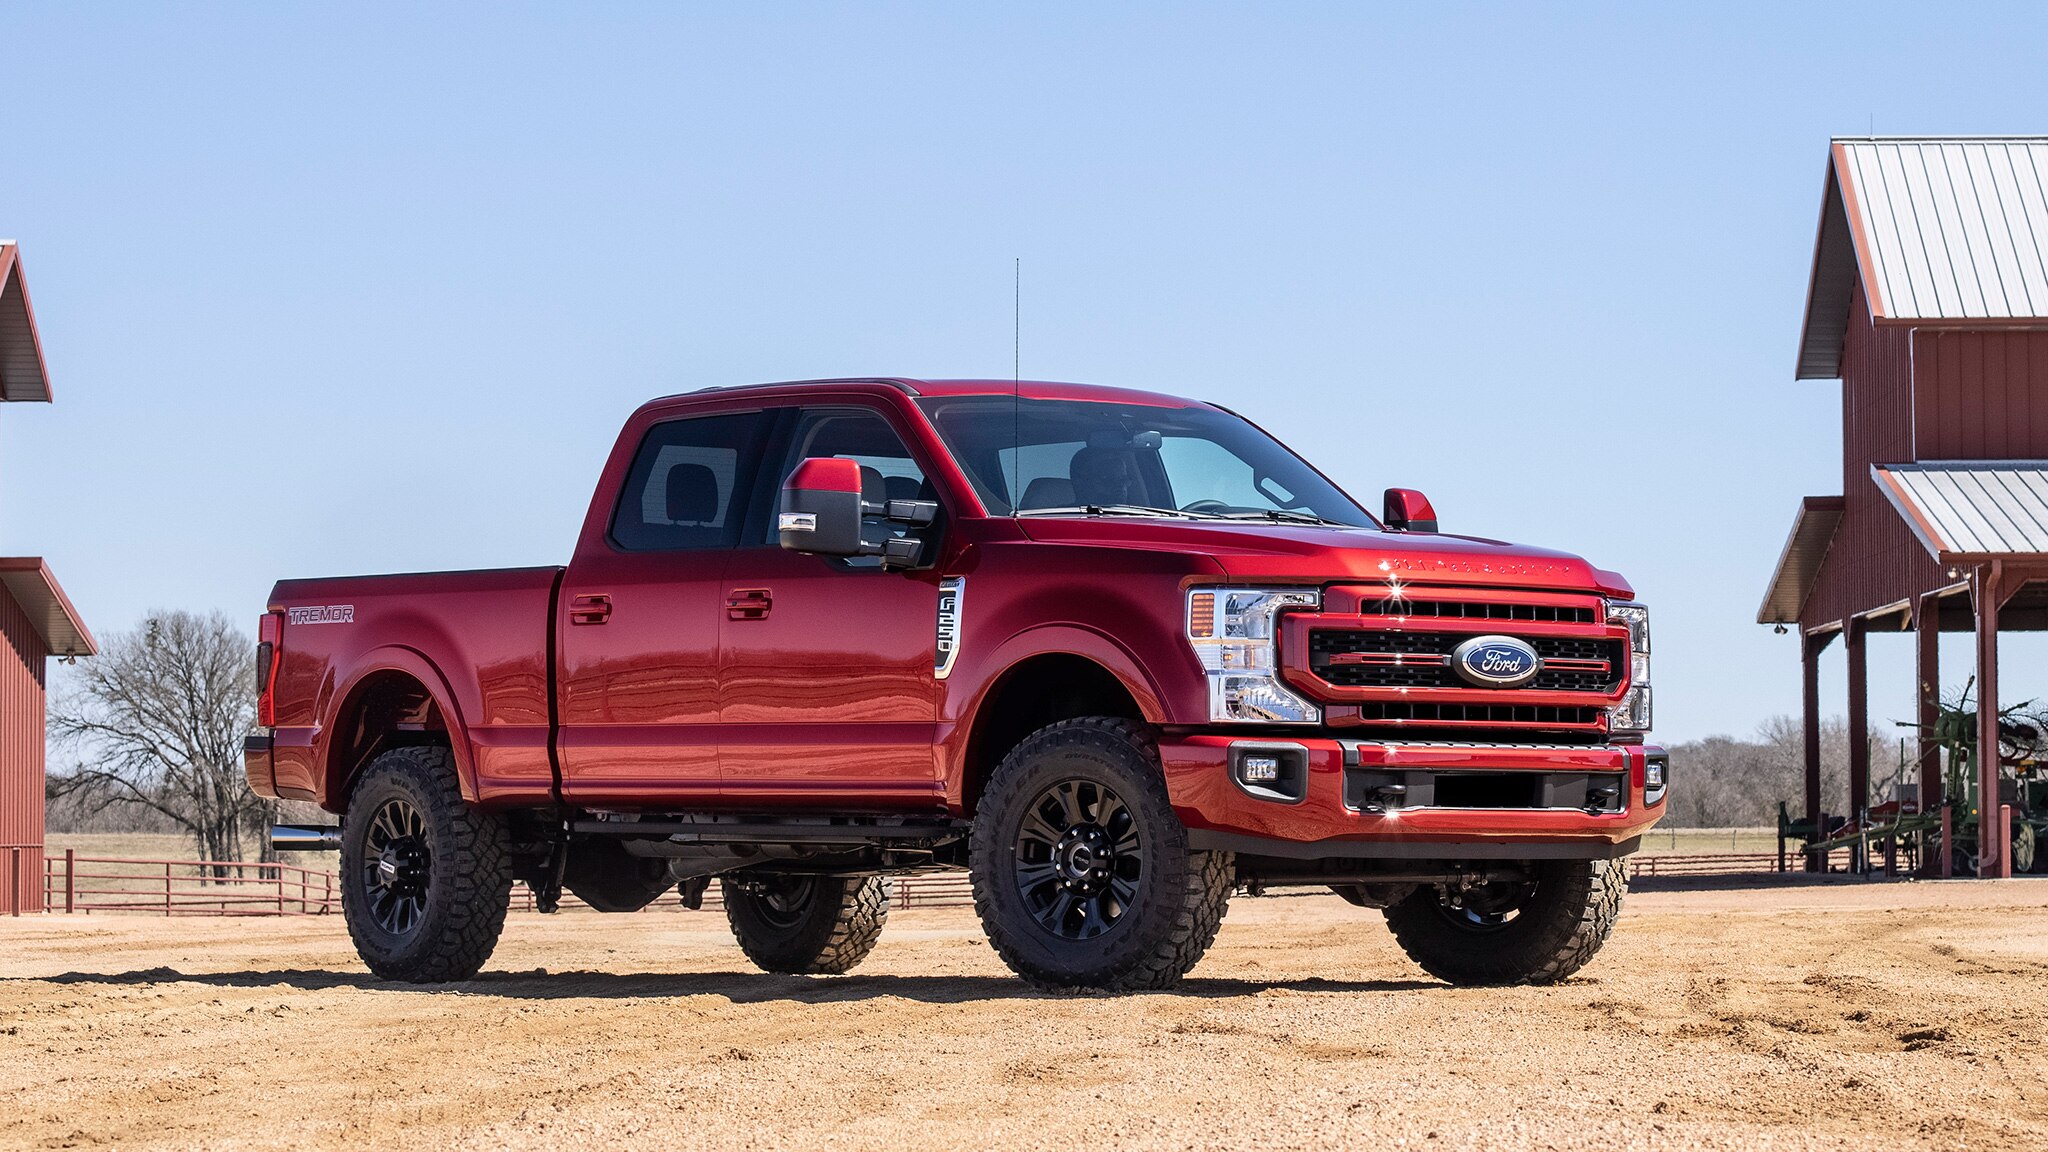 The 2022 Ford Super Duty Updates Get it Right – New Looks, More Tech, Same Big Engine!